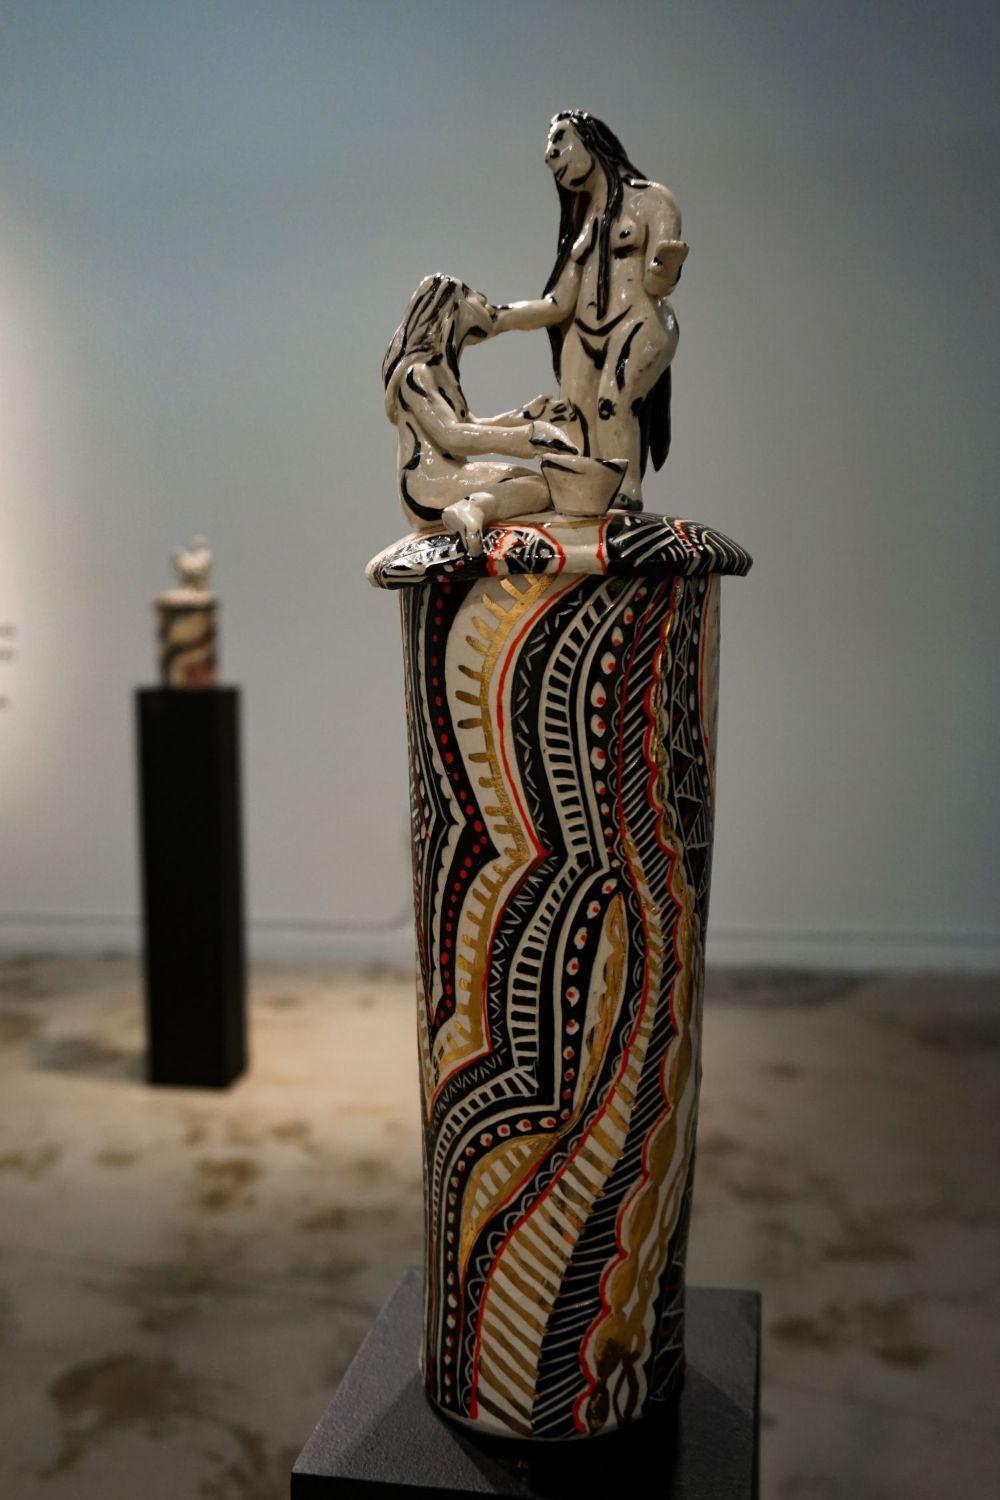 Who Washes the Feet of Mary Magdalene. Sculpture made in Porcelain, hand-painted - Gold Abstract Sculpture by Alex Hodge